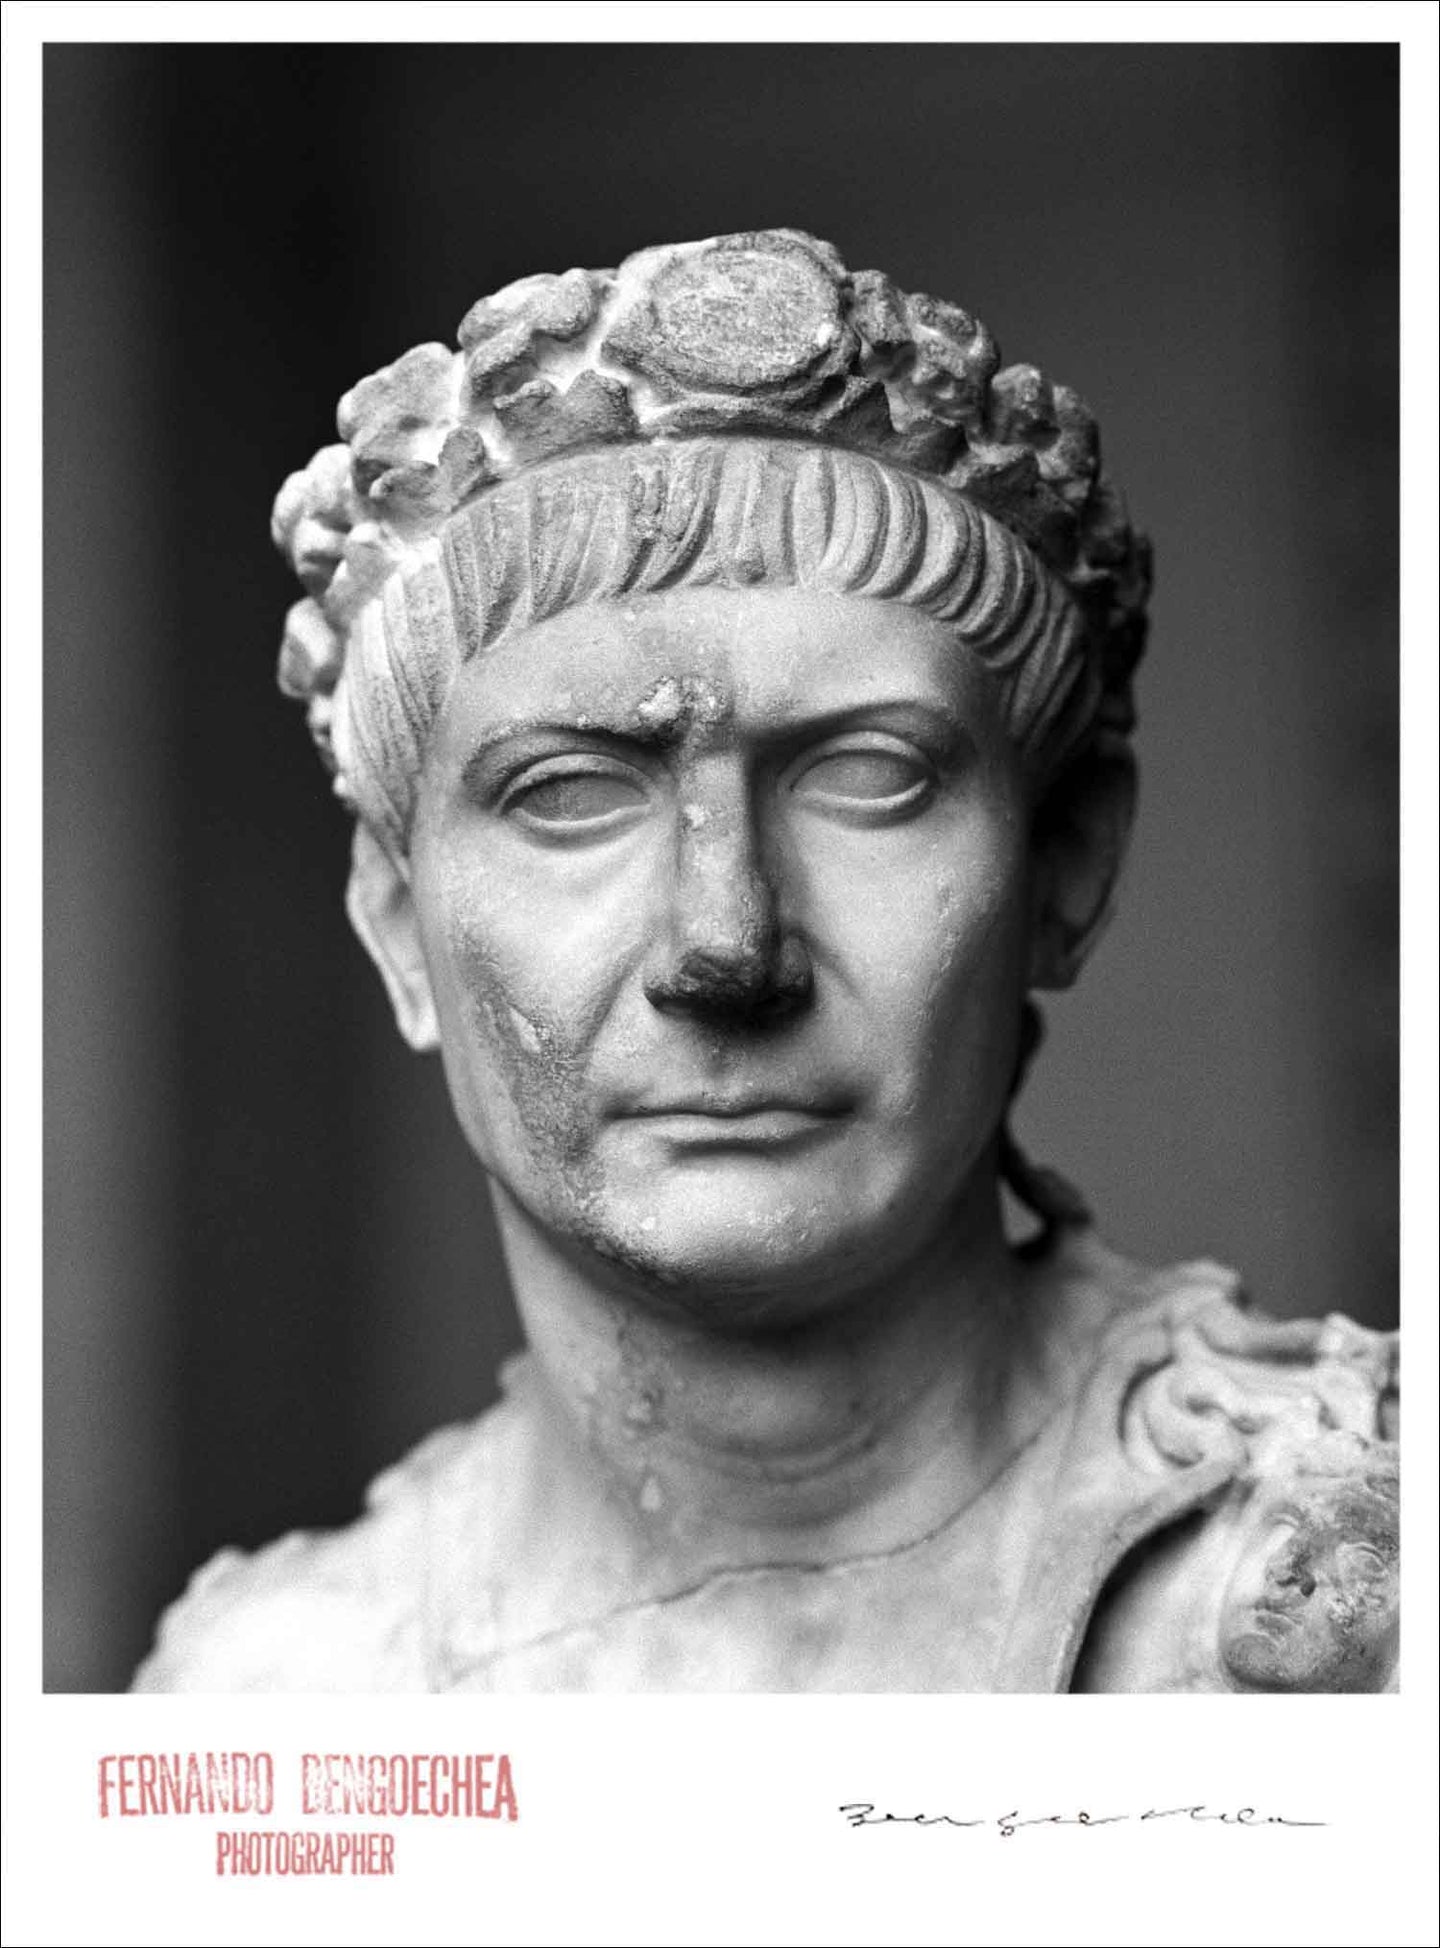 BUST # 3 / TRAJAN - Giclee Print - Stamped and Signed